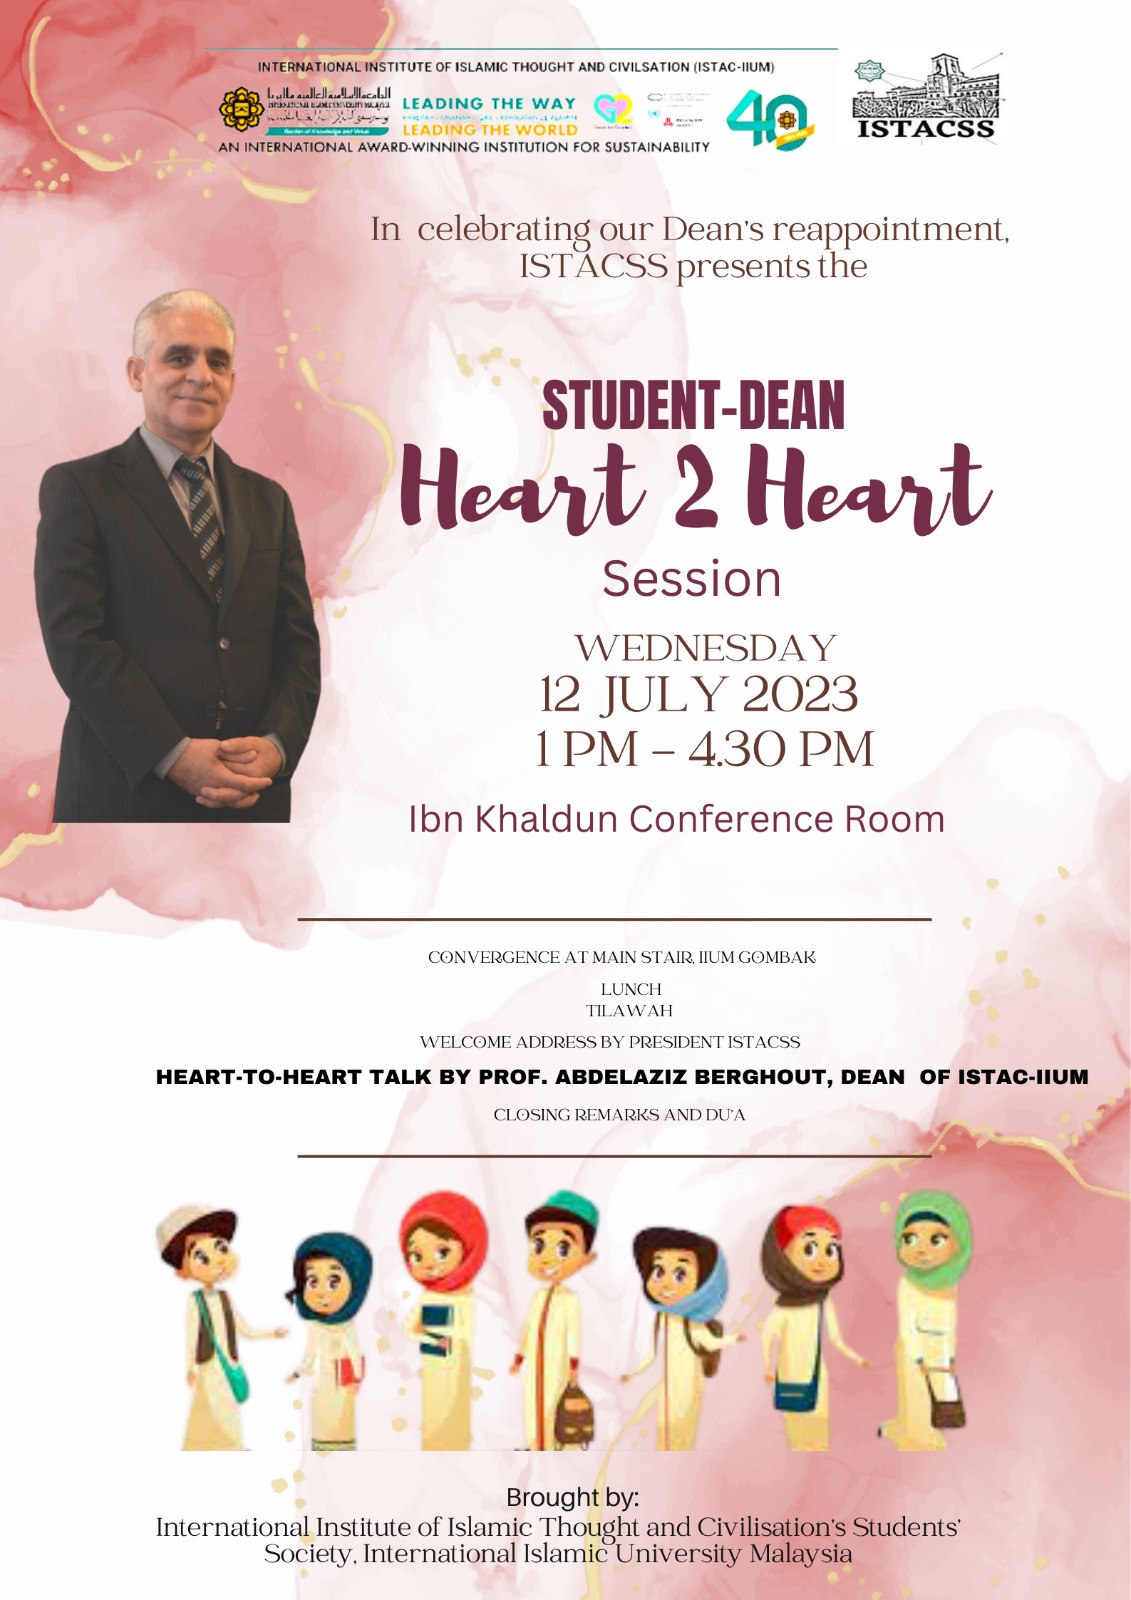 STUDENT-DEAN HEART-TO-HEART SESSION